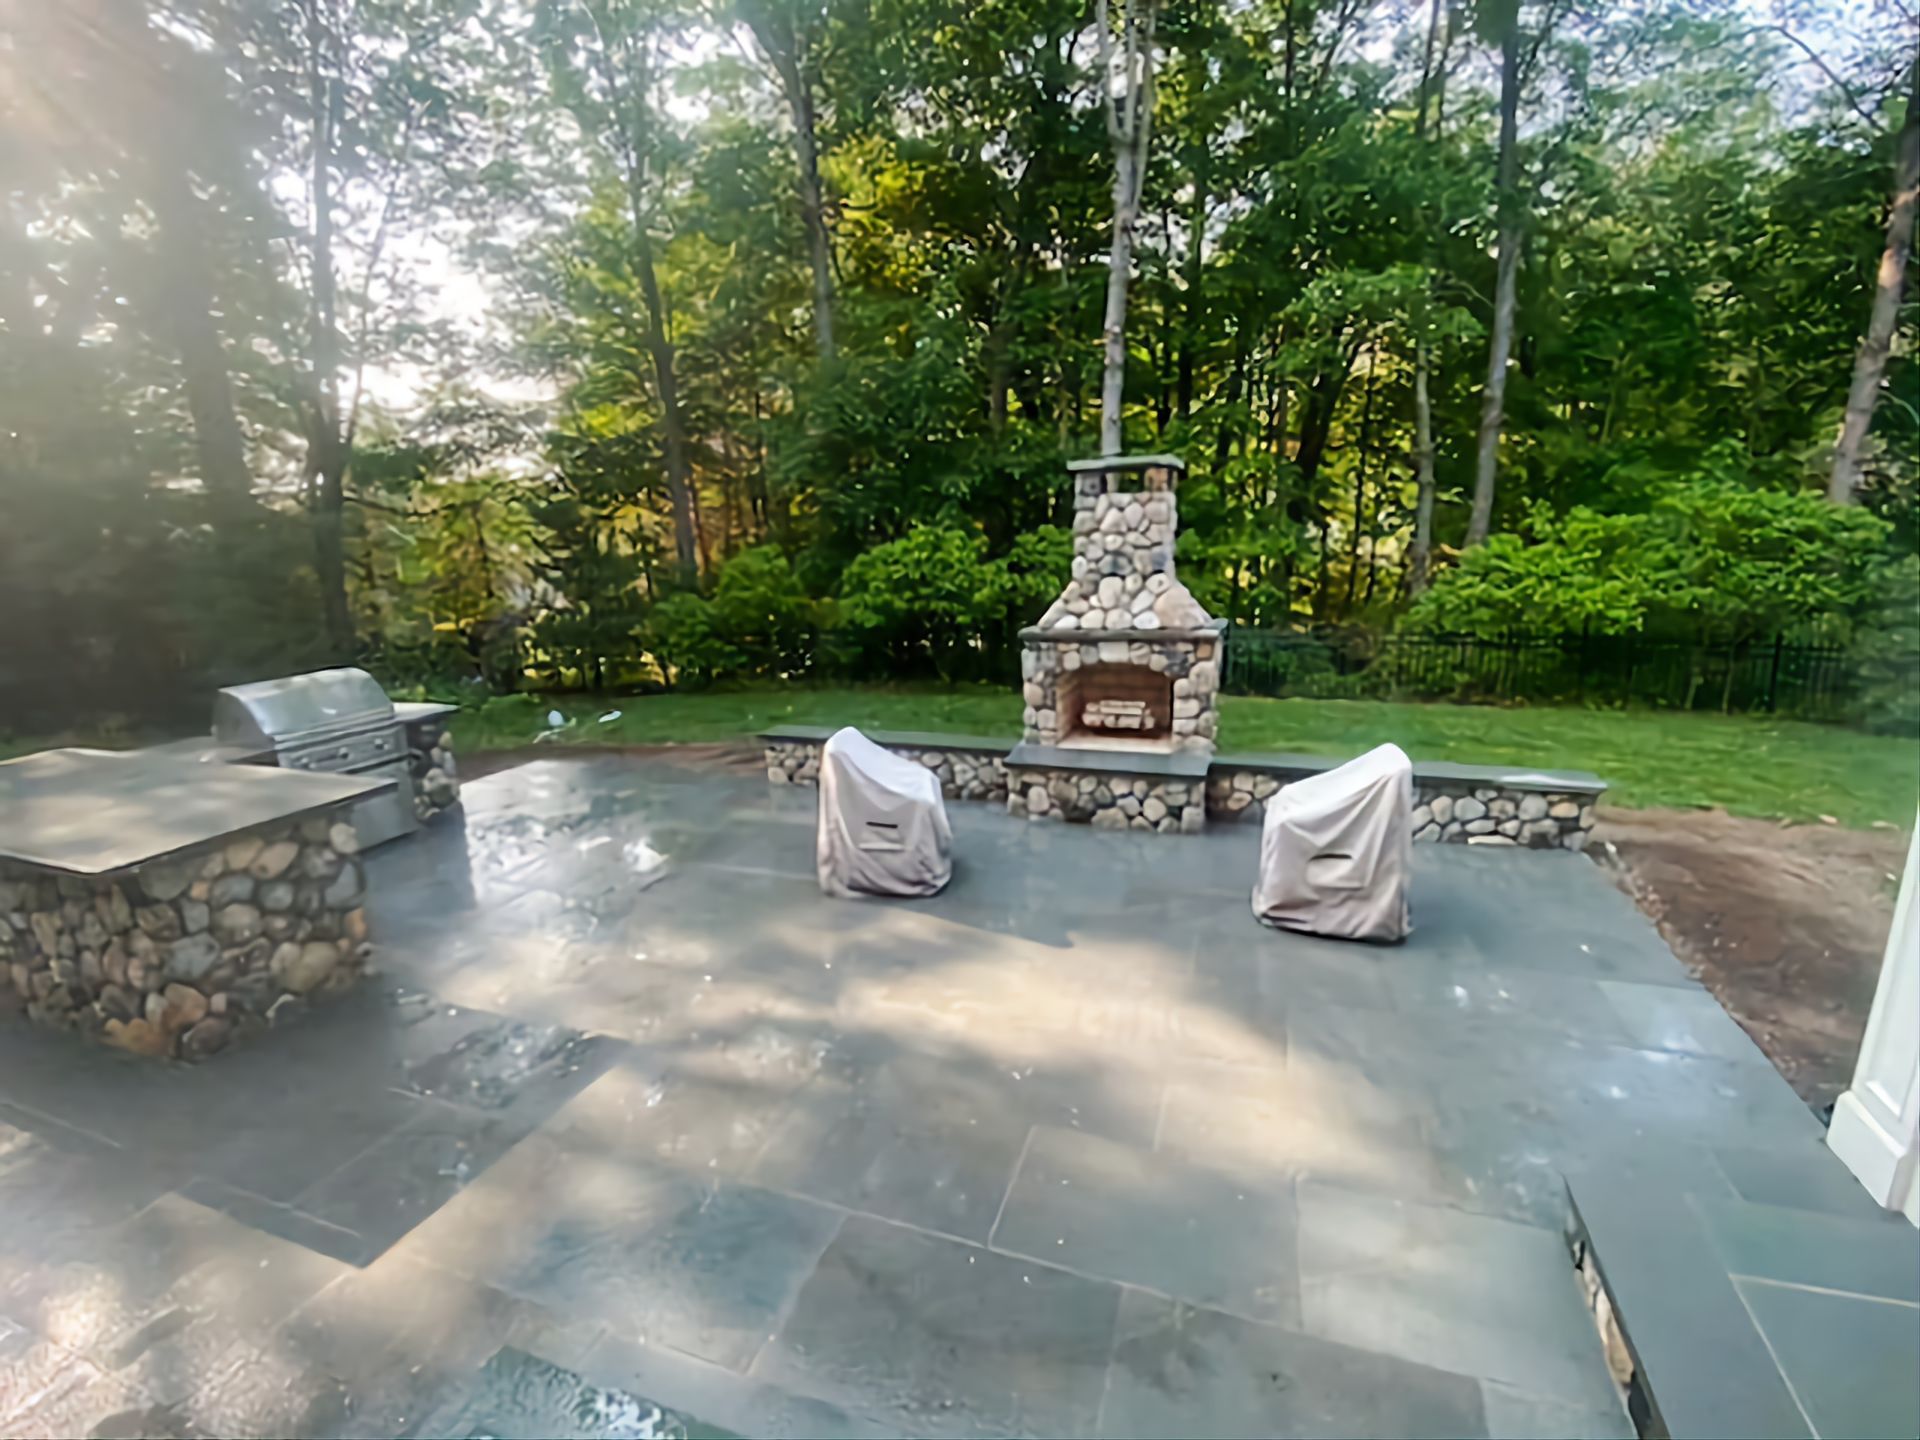 Home Improvement Services - Patio Pavers Installation in Melrose, MA